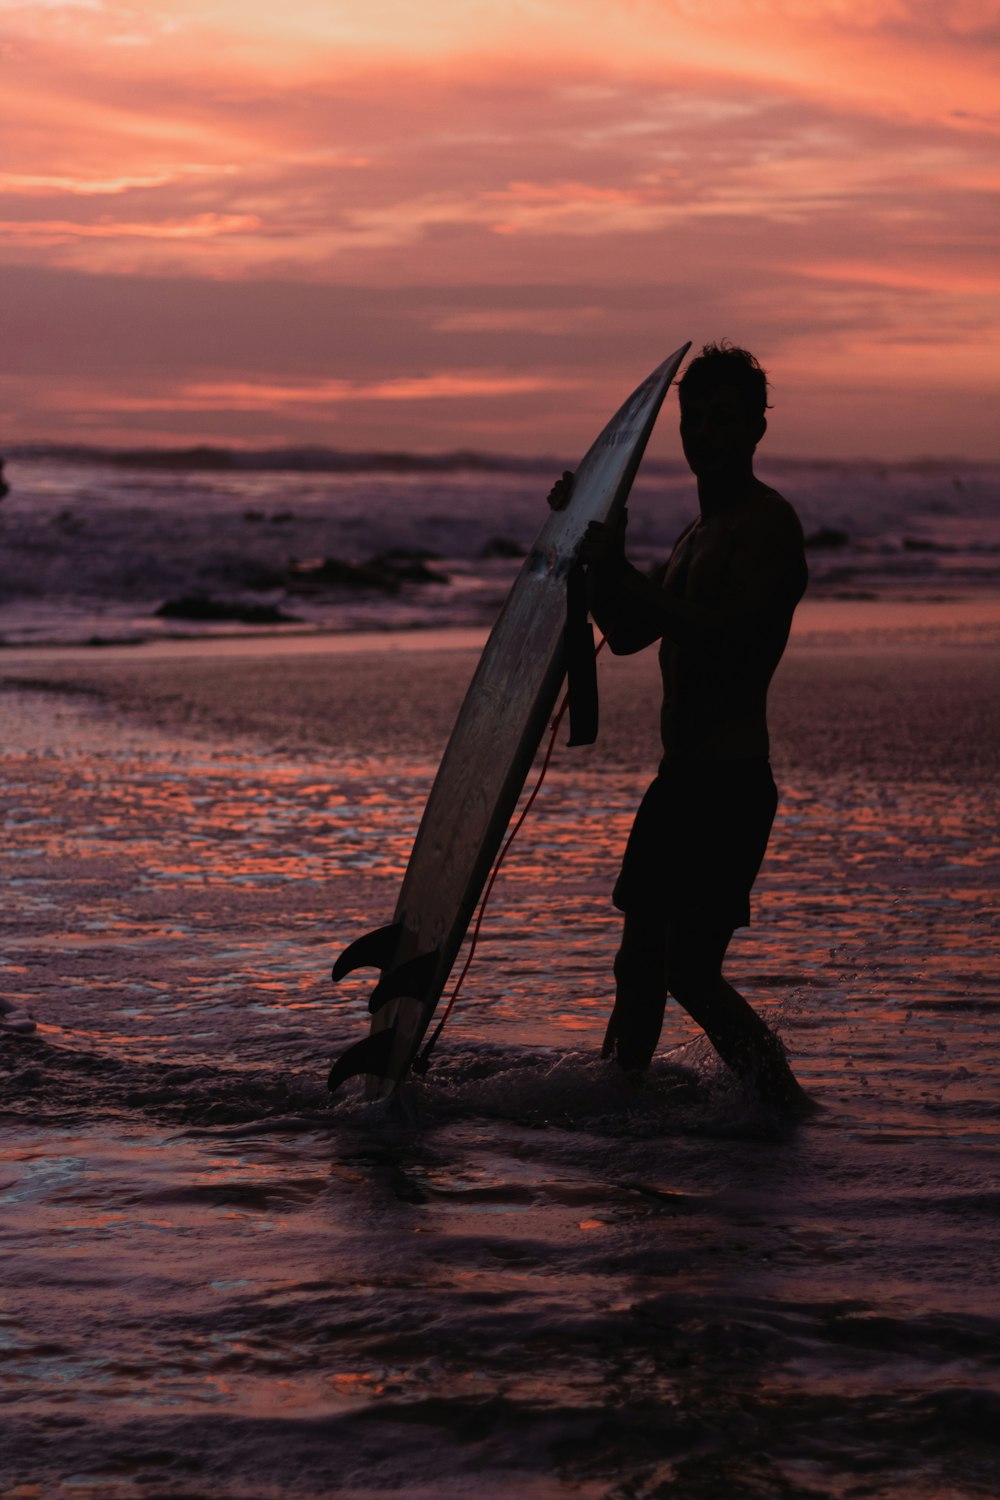 a man carrying a surfboard into the ocean at sunset